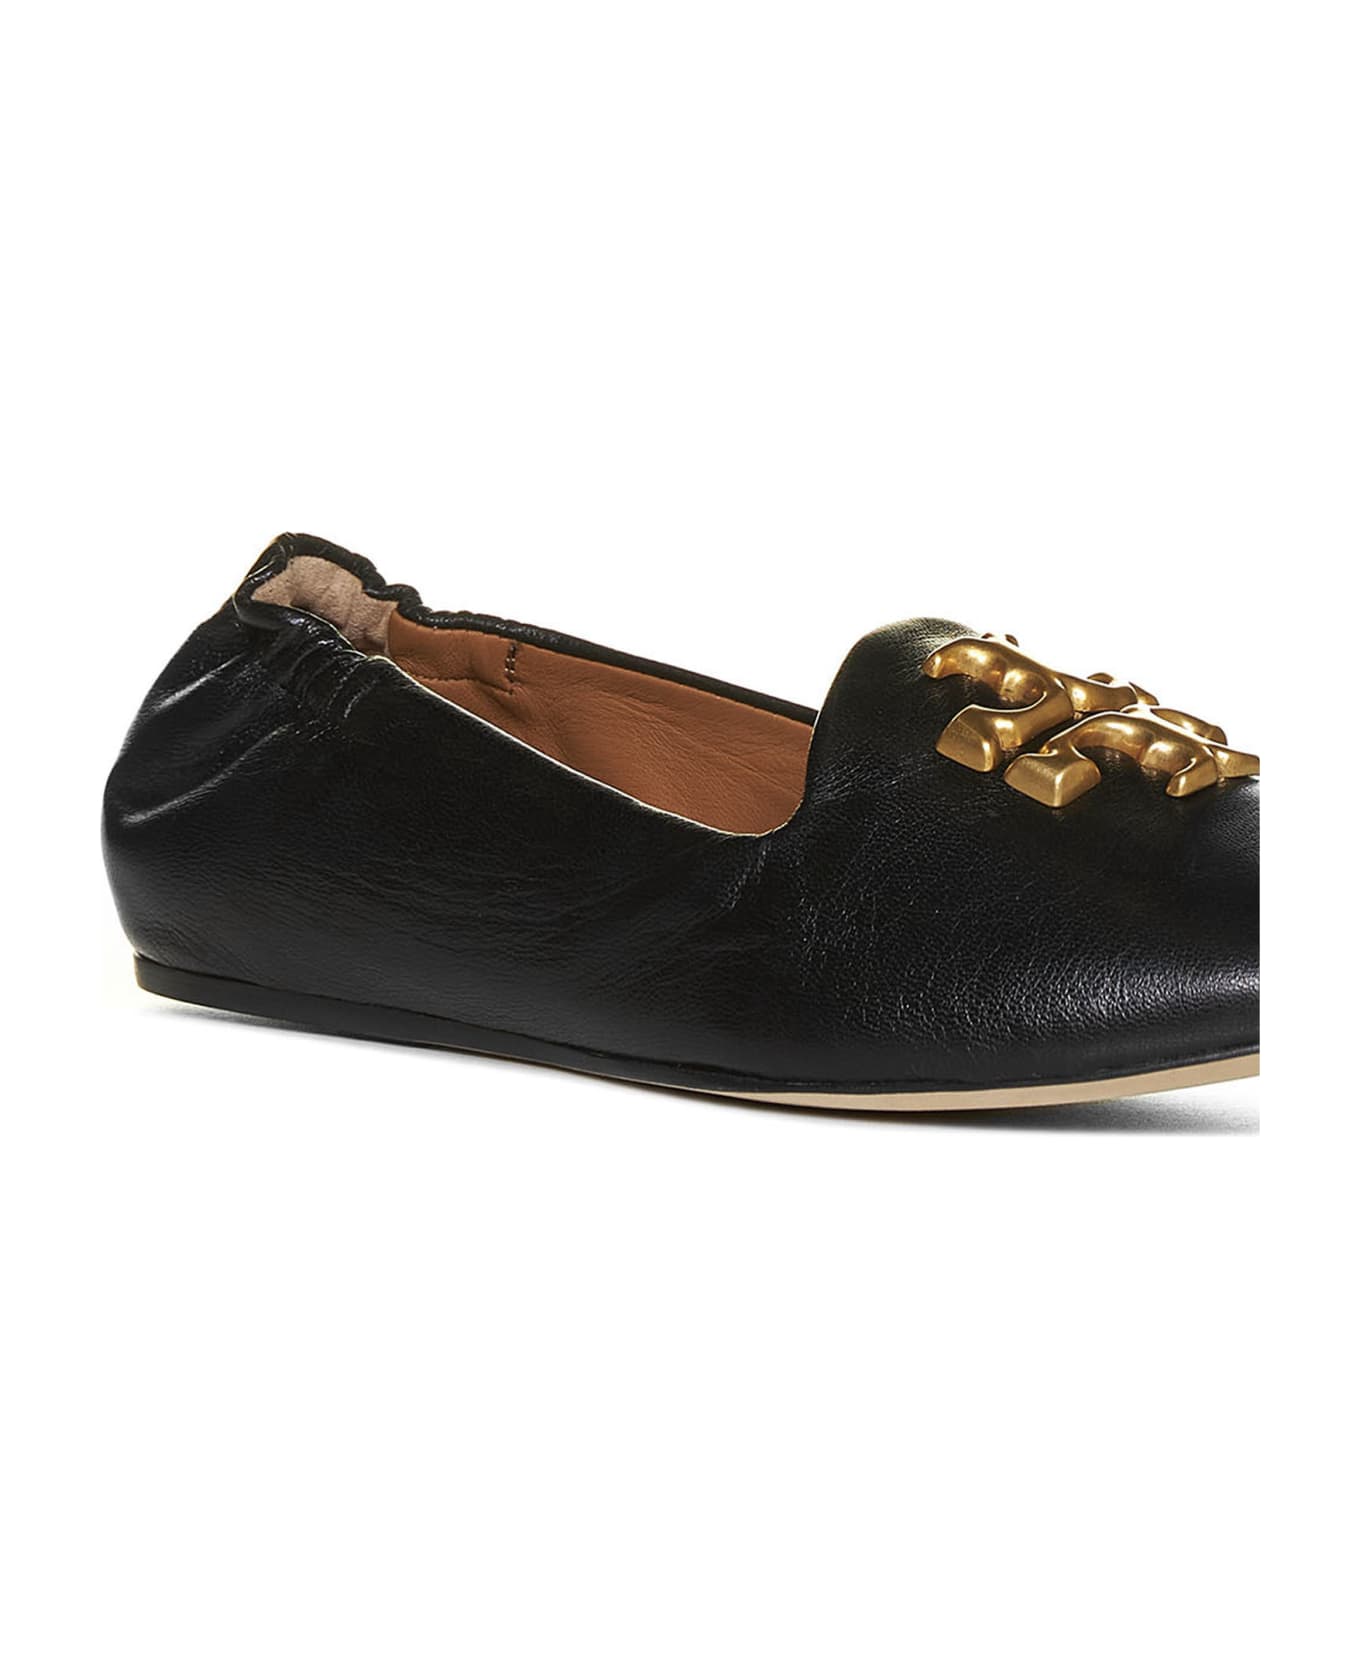 Tory Burch Eleanor Loafers - Perfect black フラットシューズ